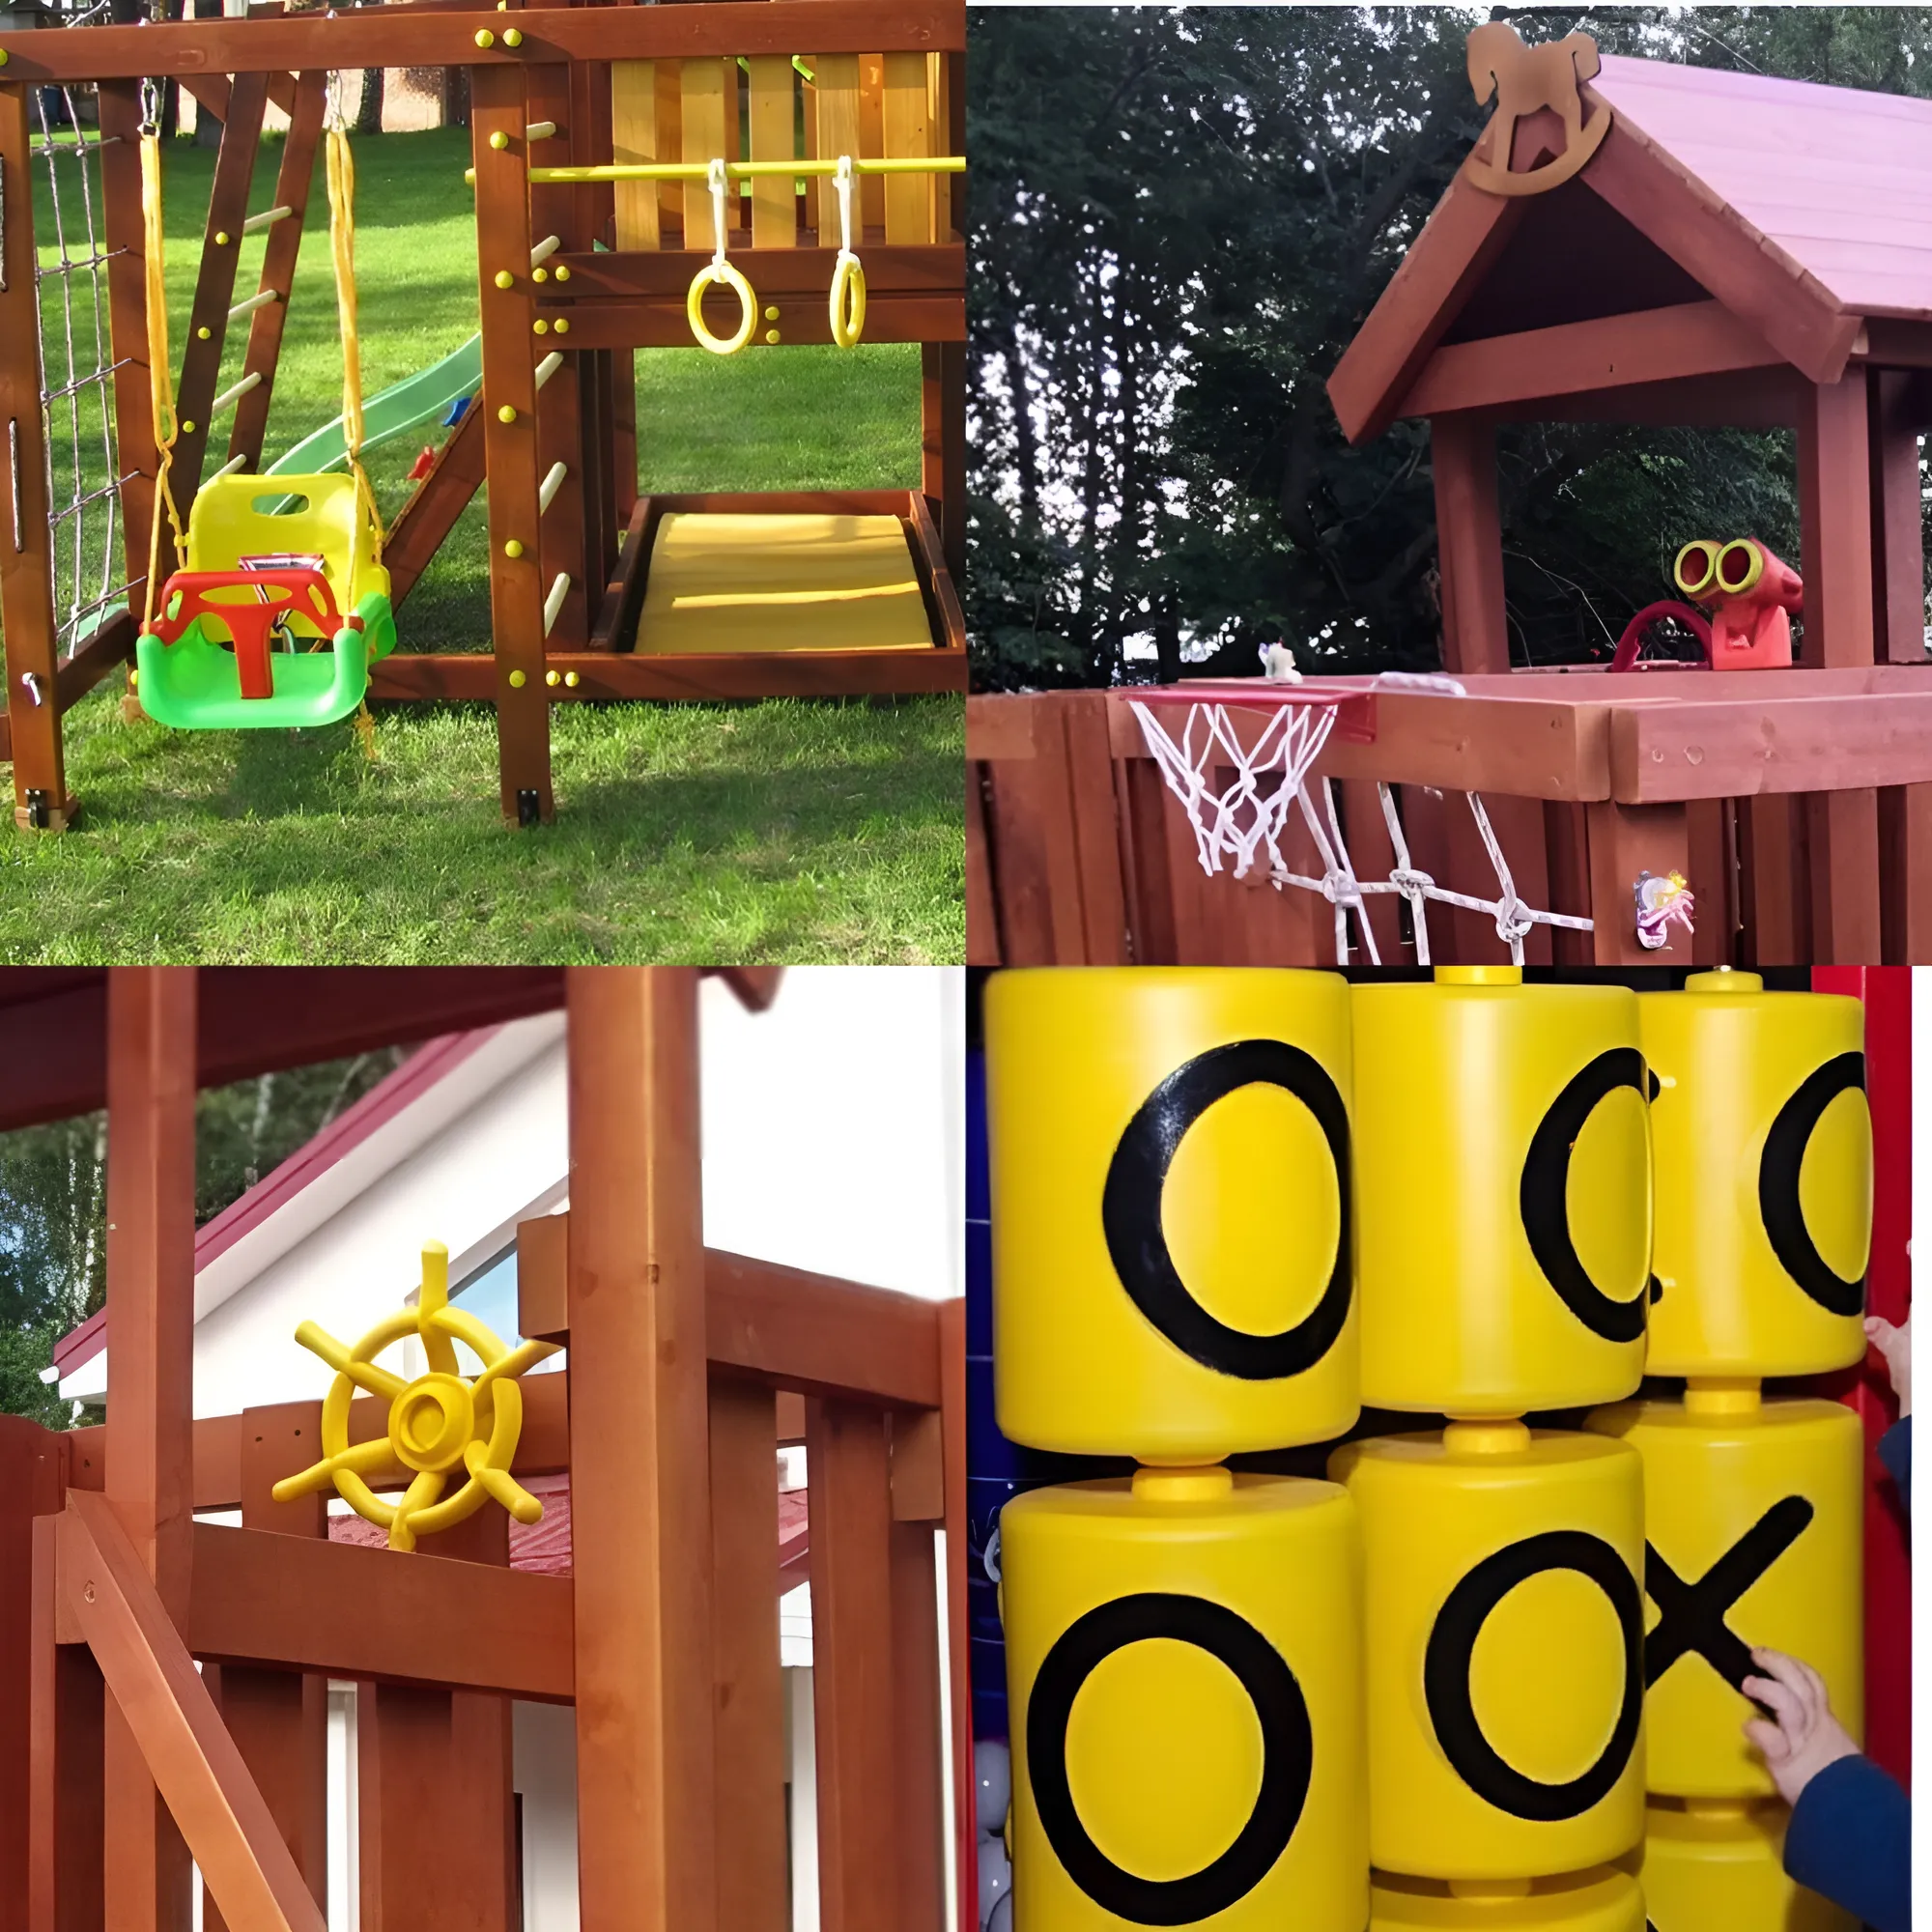 ACCESSORIES FOR CHILDREN'S PLAYGROUNDS